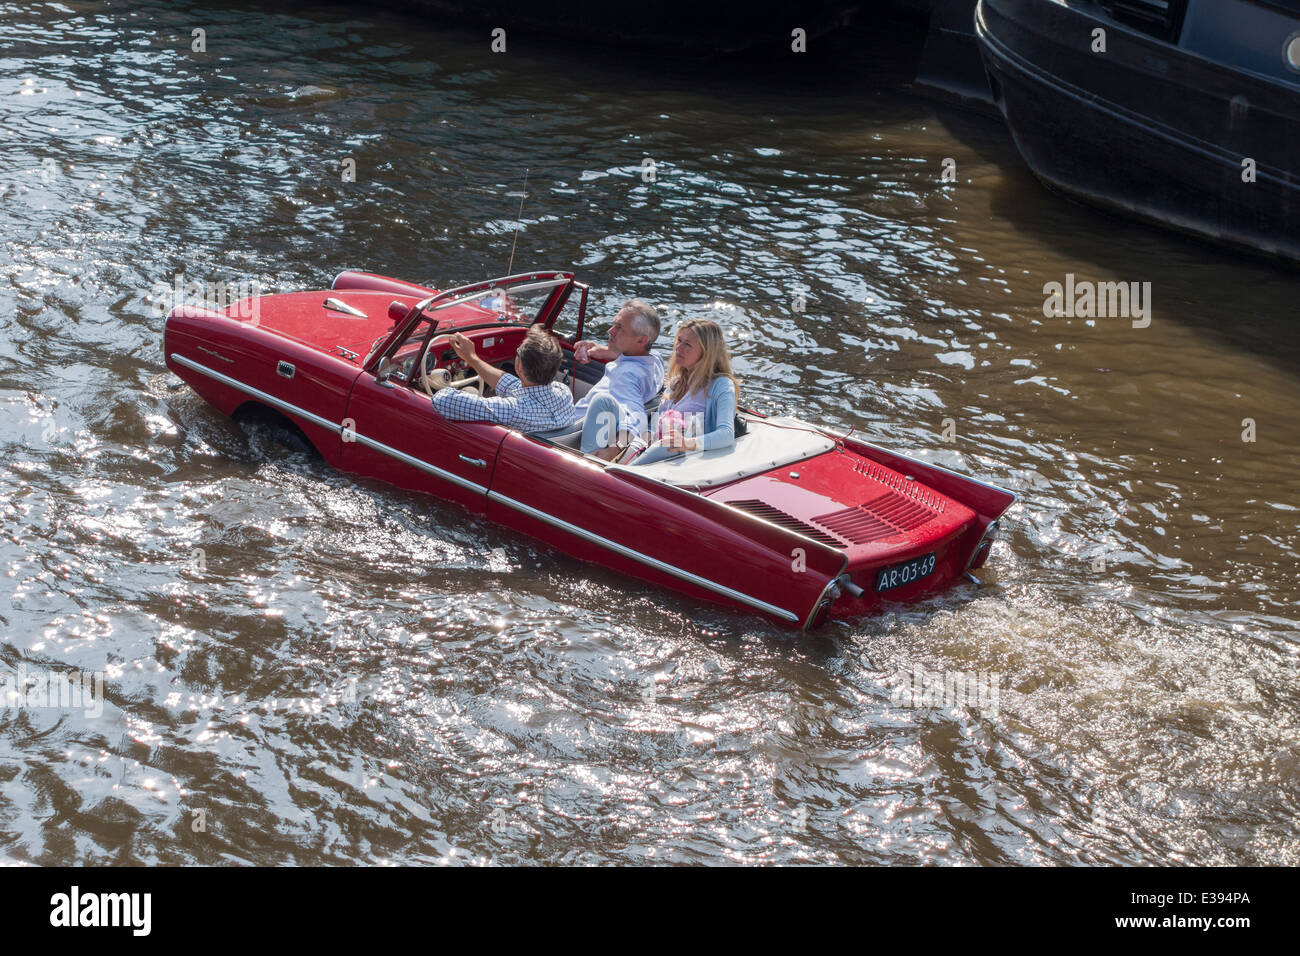 Vintage Amphicar 770 in an Amsterdam canal. Amphibious auto, water car, car boat with people. Stock Photo